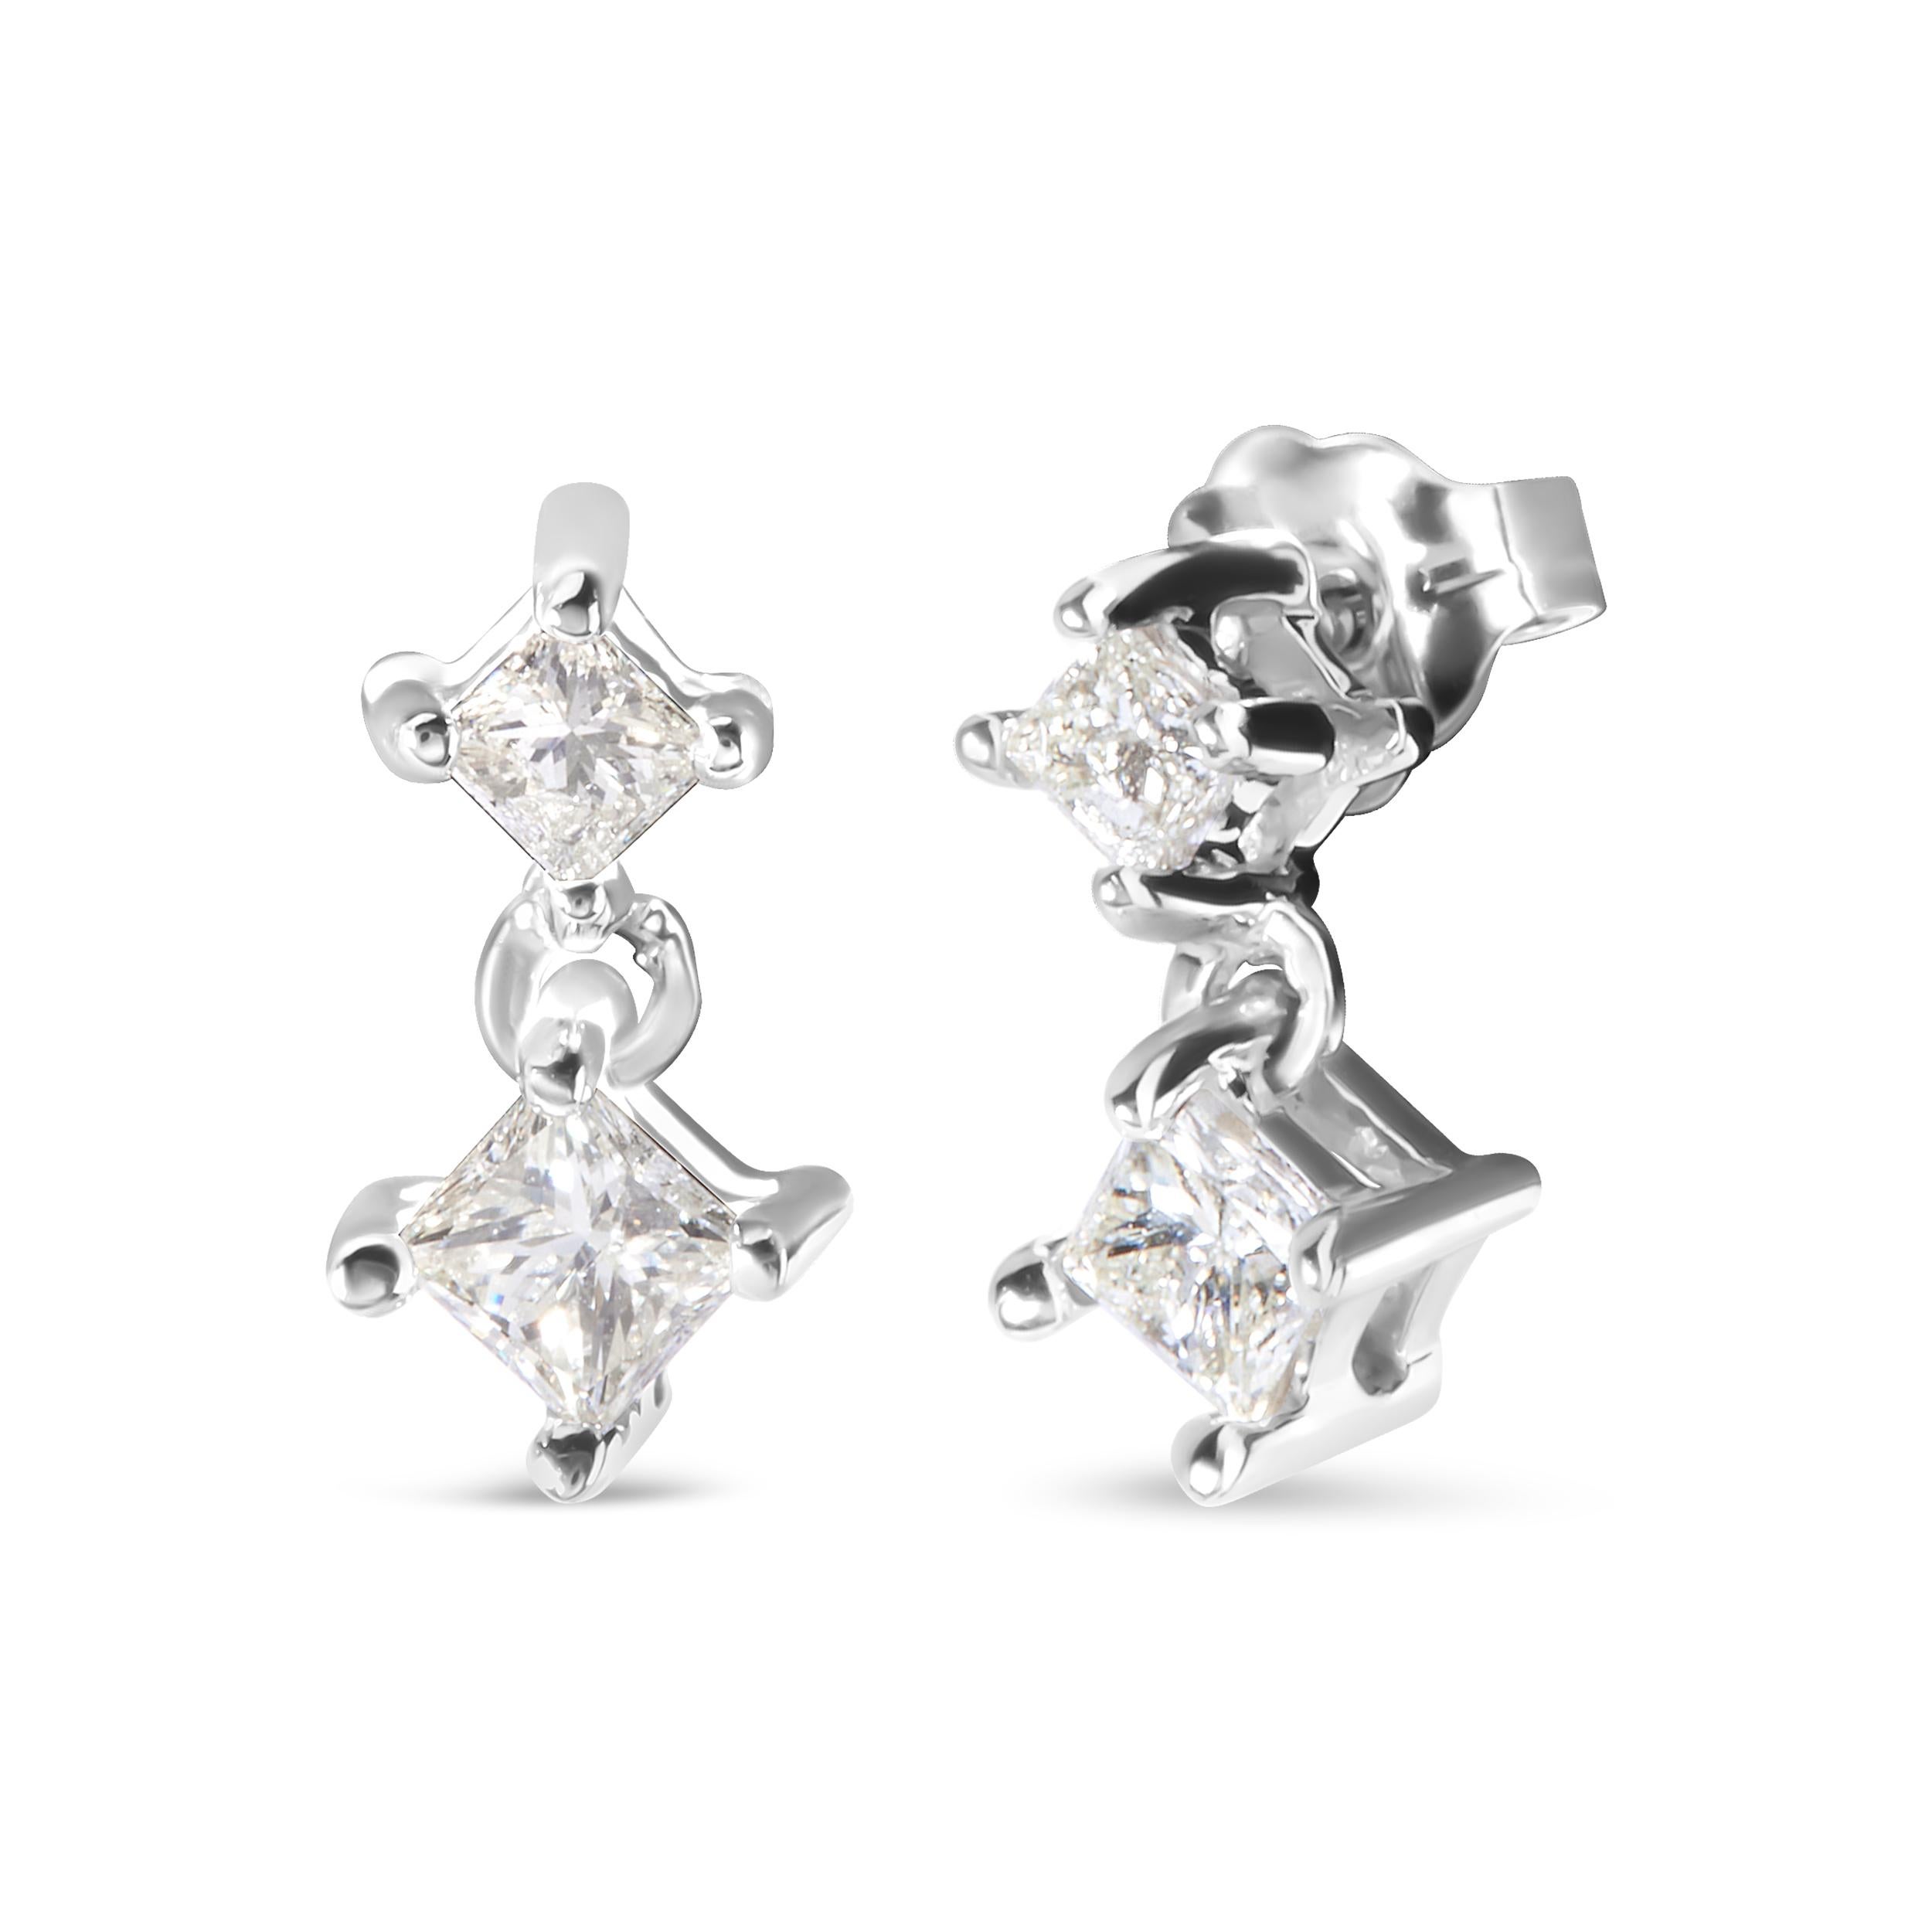 Lend some flair and edgy sparkle to your look with this classic pair of earrings. Designed with extreme precision and sophistication, the masterpiece is crafted of rich 14 karat white gold. Each of the pieces is beautified with prong set princess